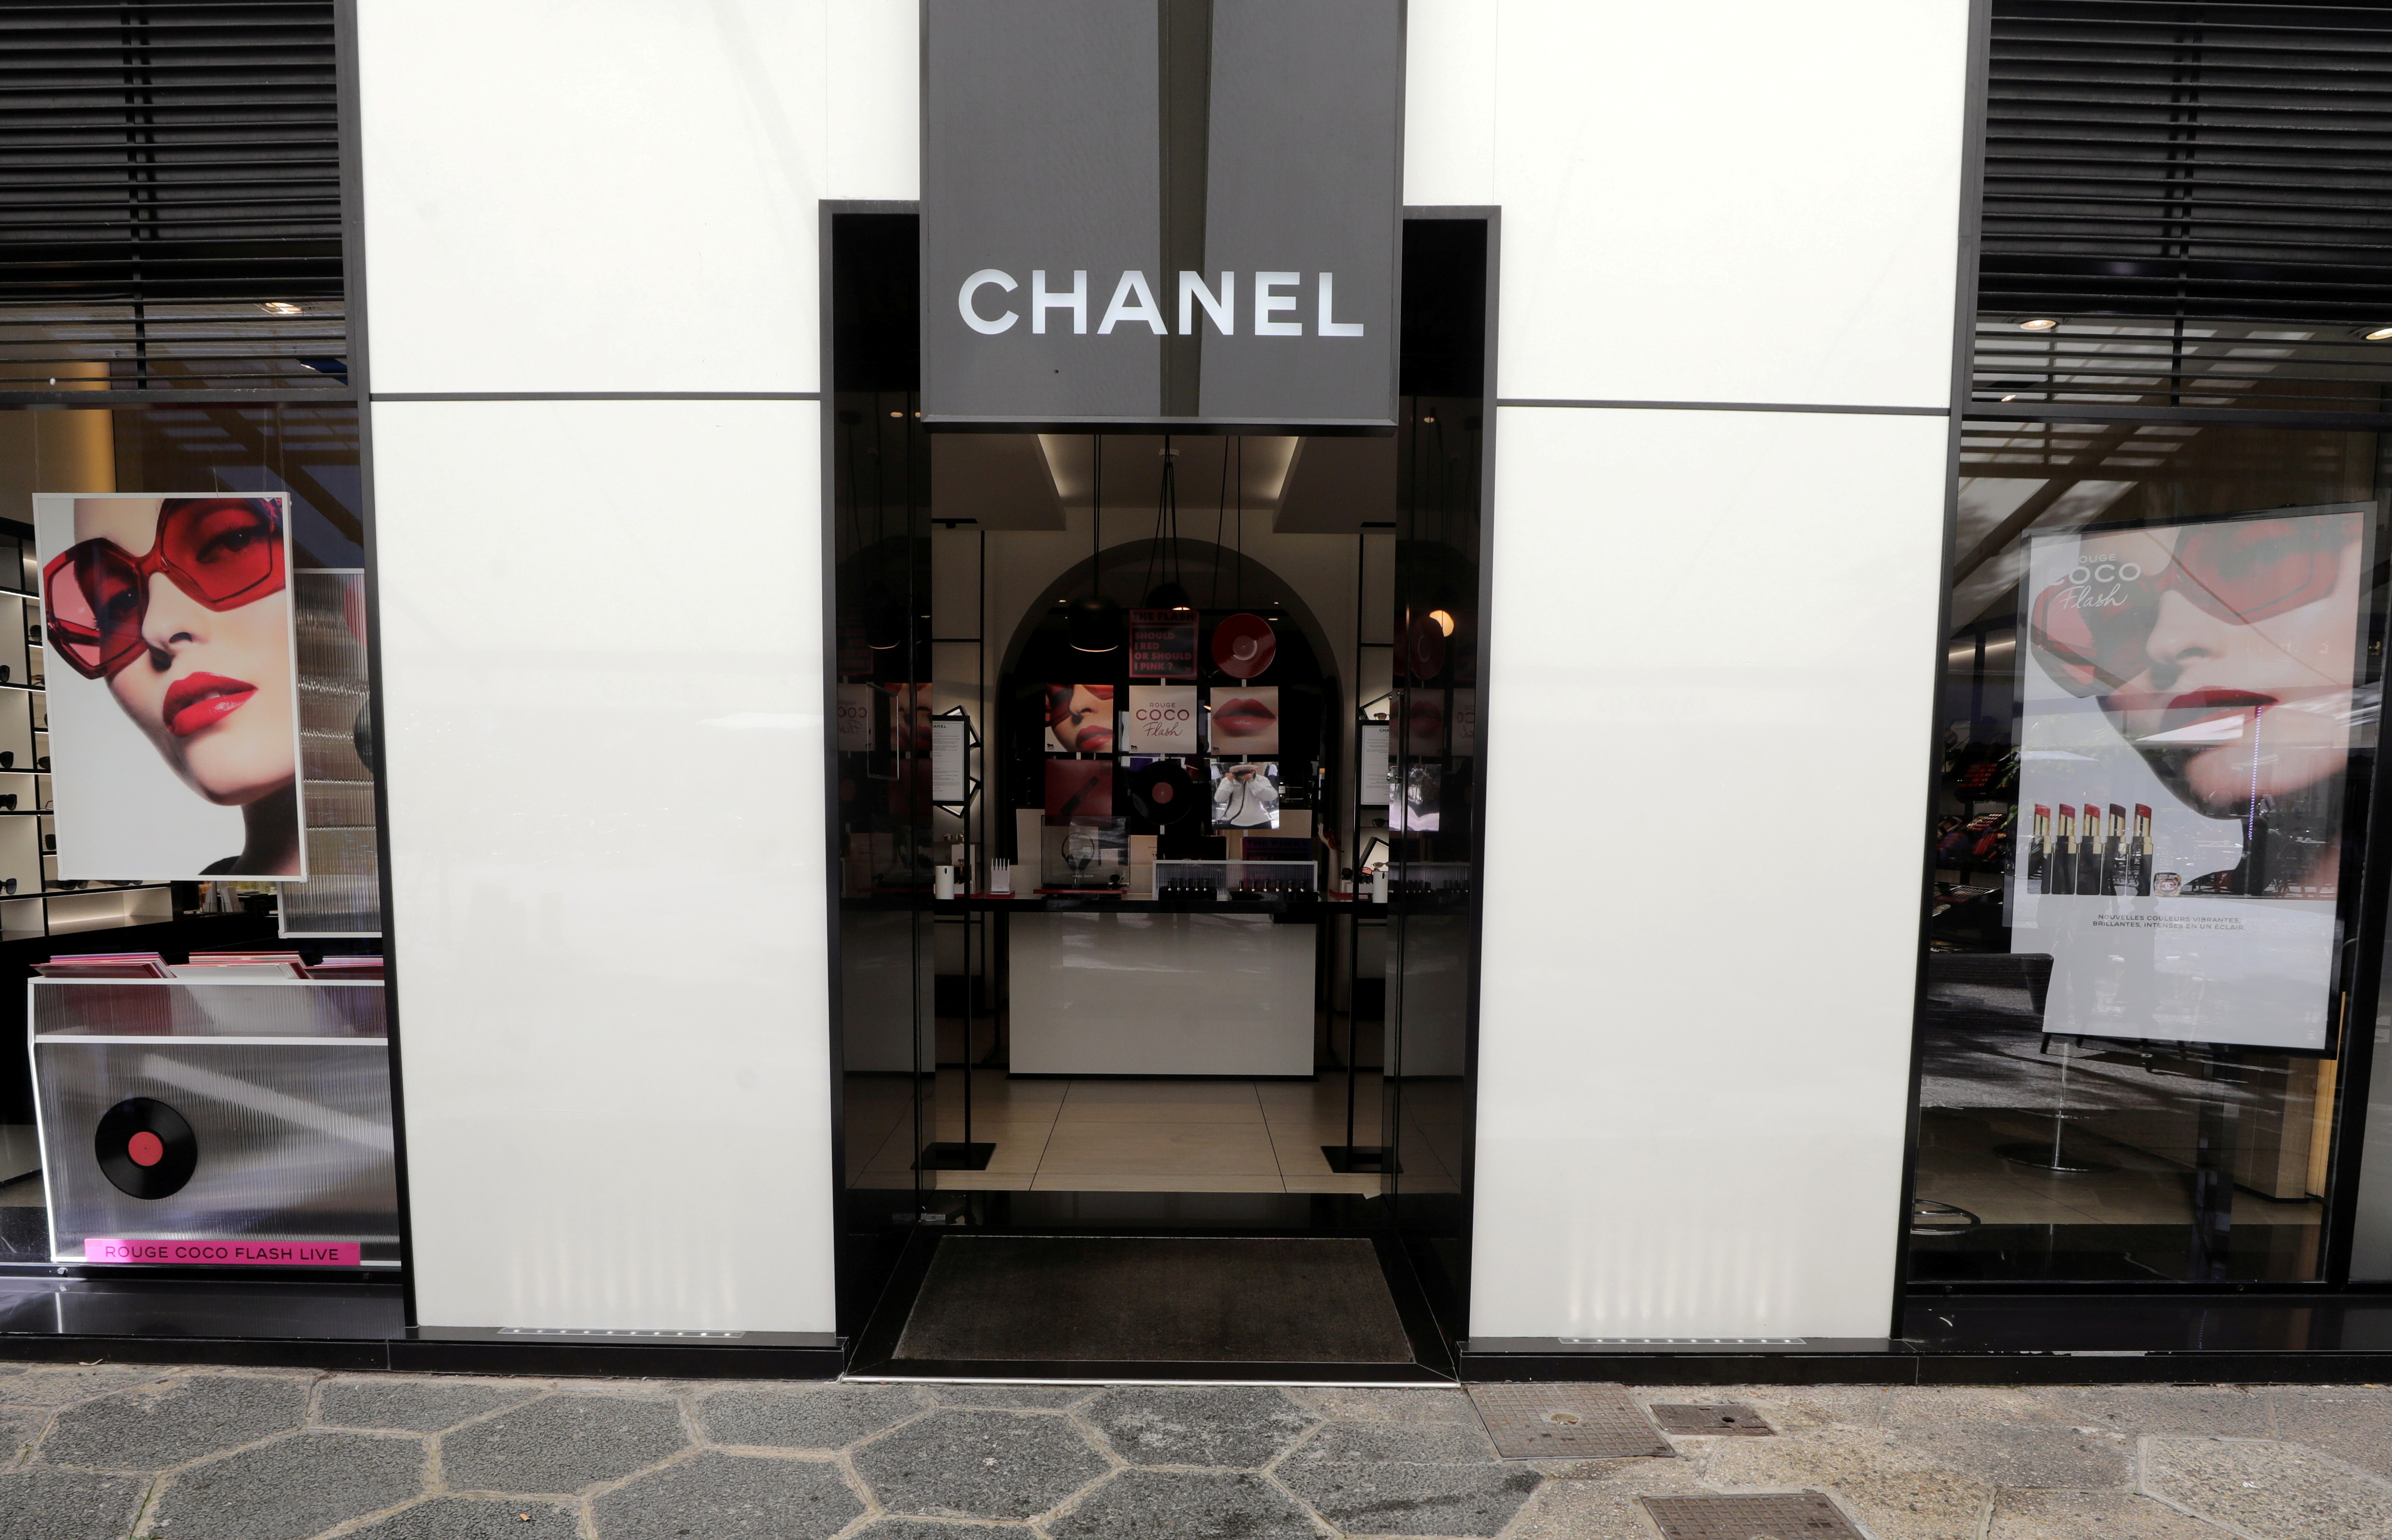 A view shows a Chanel logo on a store of luxury fashion group Chanel in Nice